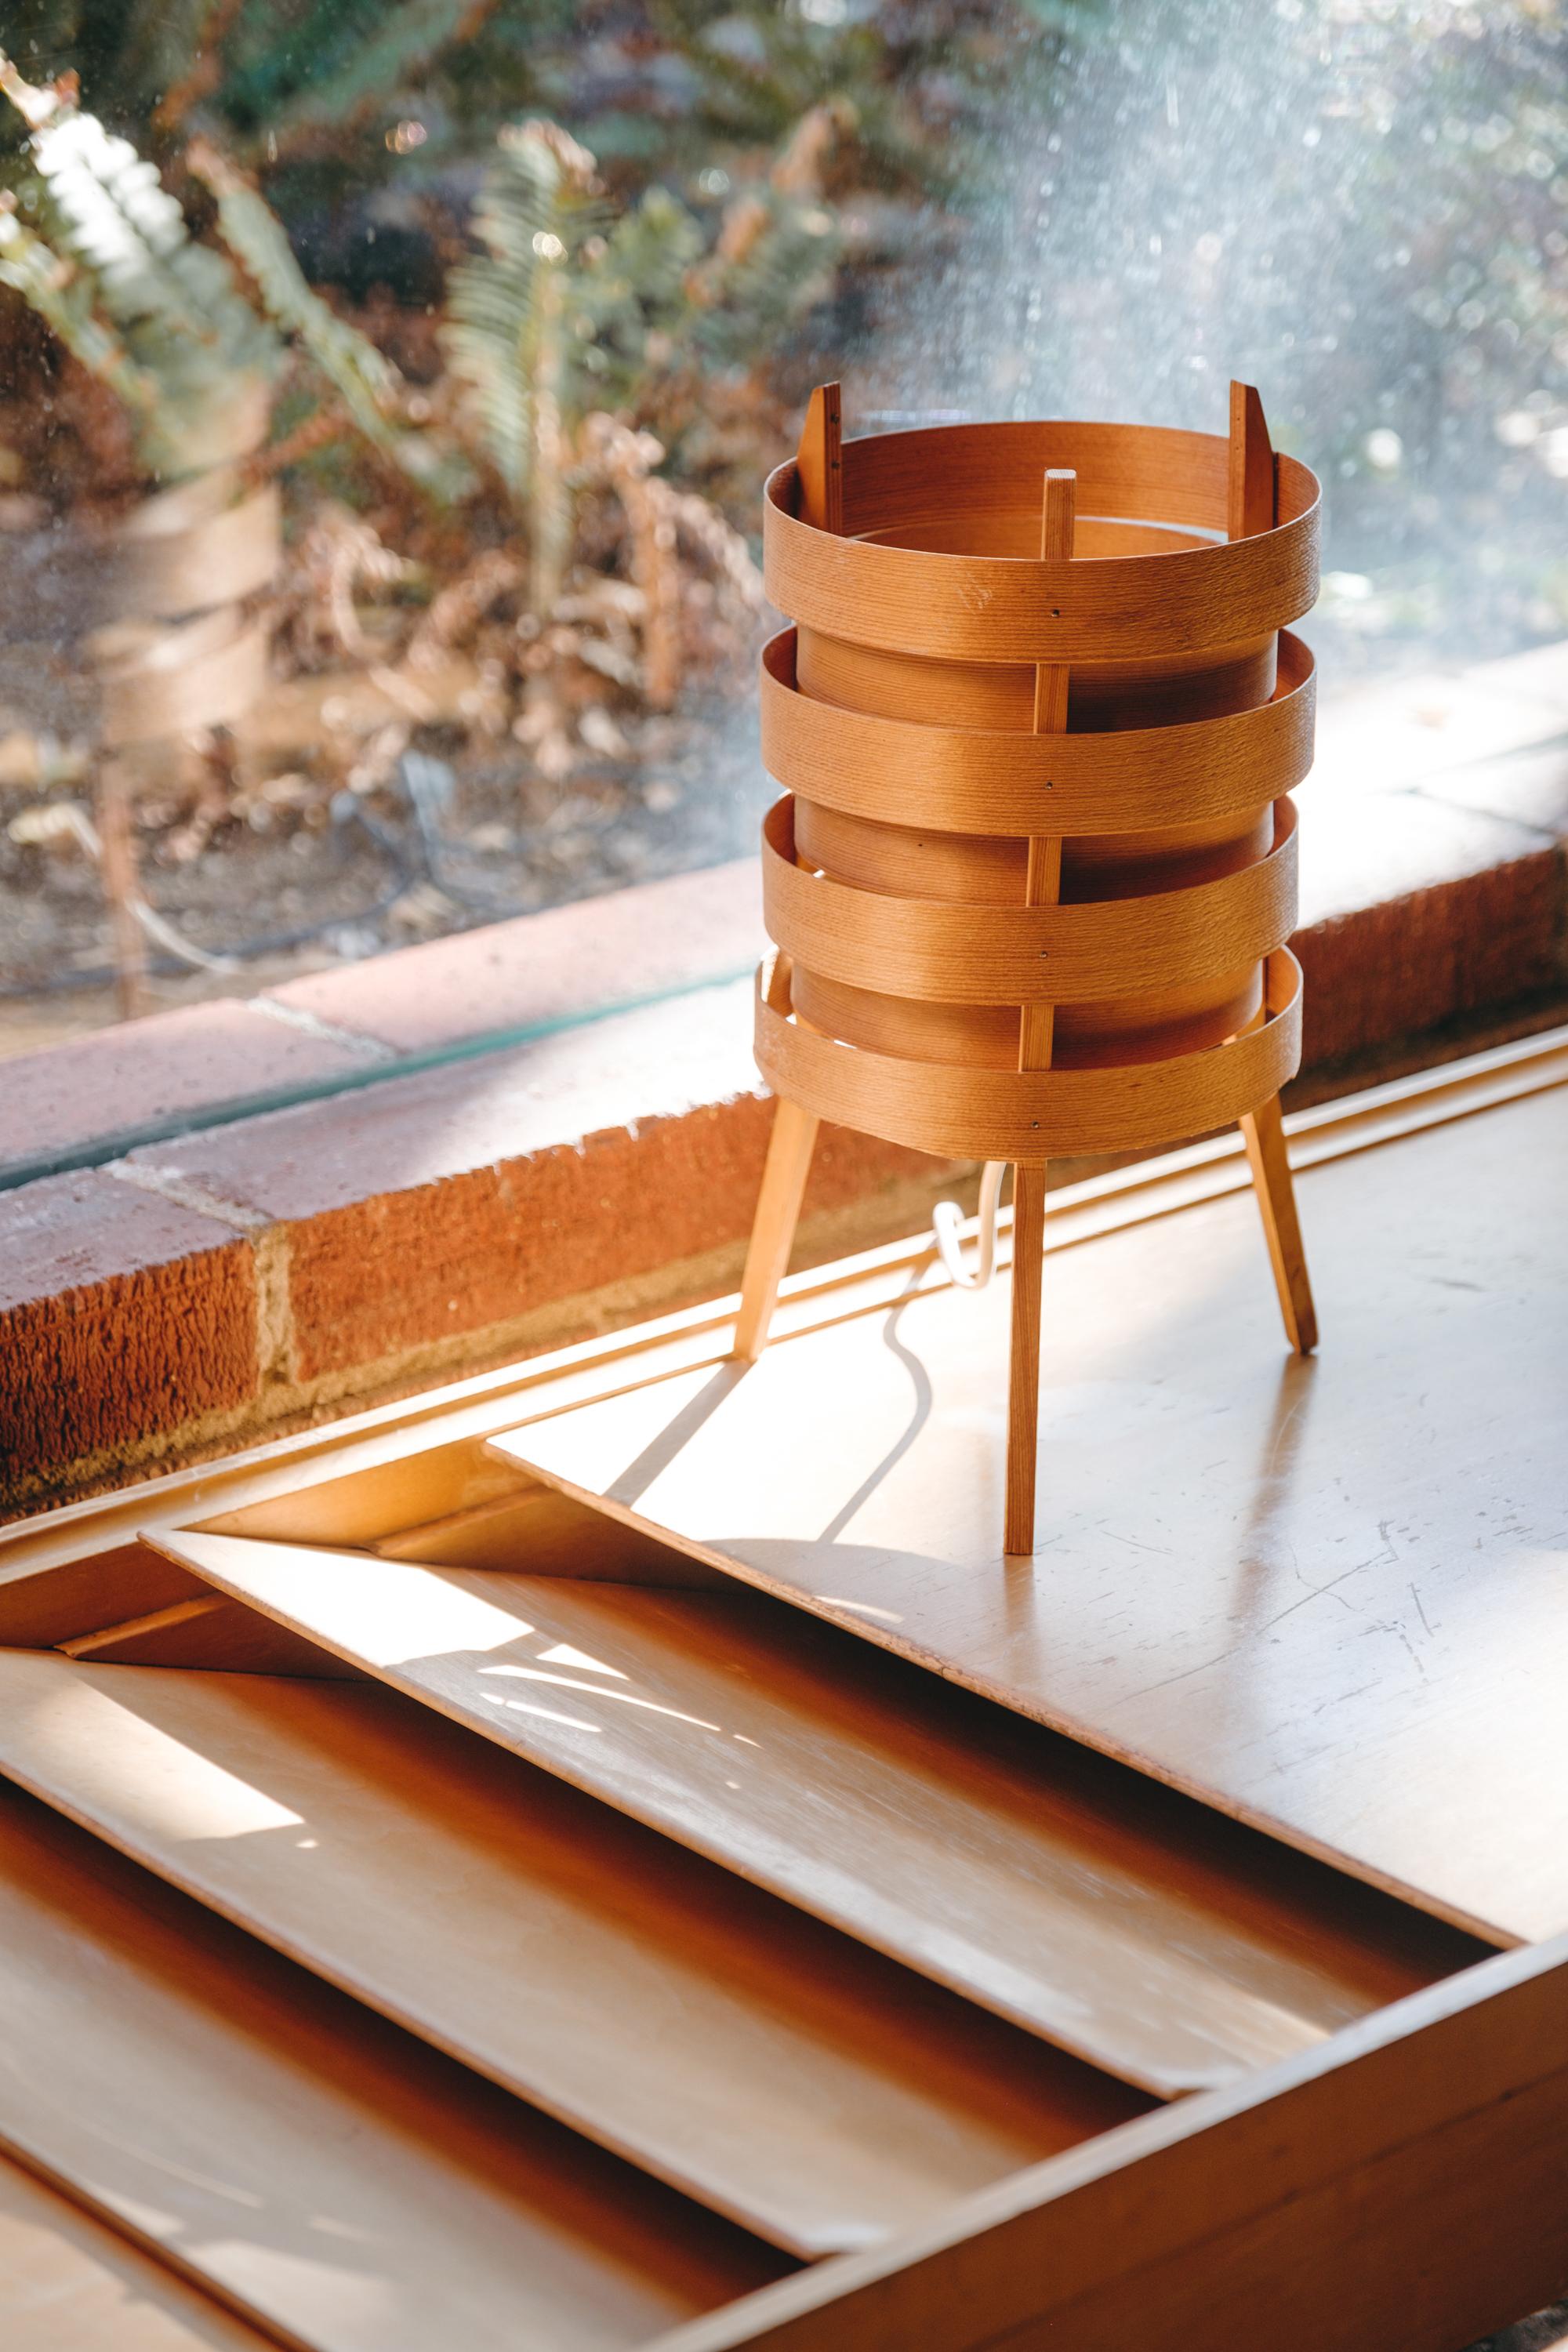 1960s Hans-Agne Jakobsson tripod wood table lamp for AB Ellysett. Designed and produced by Jakobsson in Markaryd, Sweden and executed in thin bentwood with solid tripod base structure. A rare and sculptural lamp that has become increasingly valued